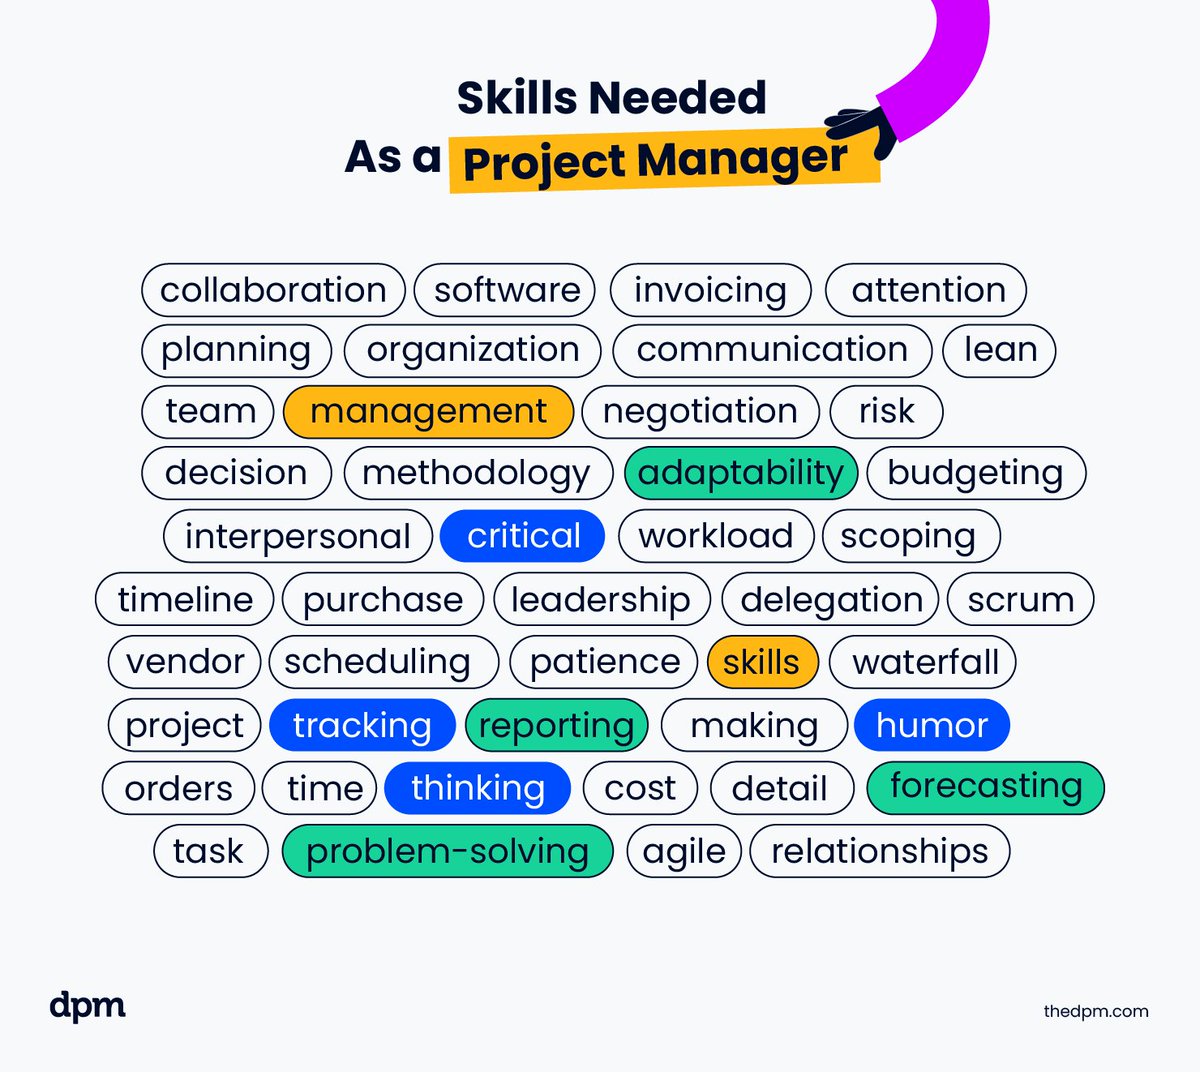 What skills do you already have as a PM and what skills do you need help with? 🤔

Let us know below! 👇

#ProjectManagement #ProjectManager #PM #Skills #HardSkills #SoftSkills #Development